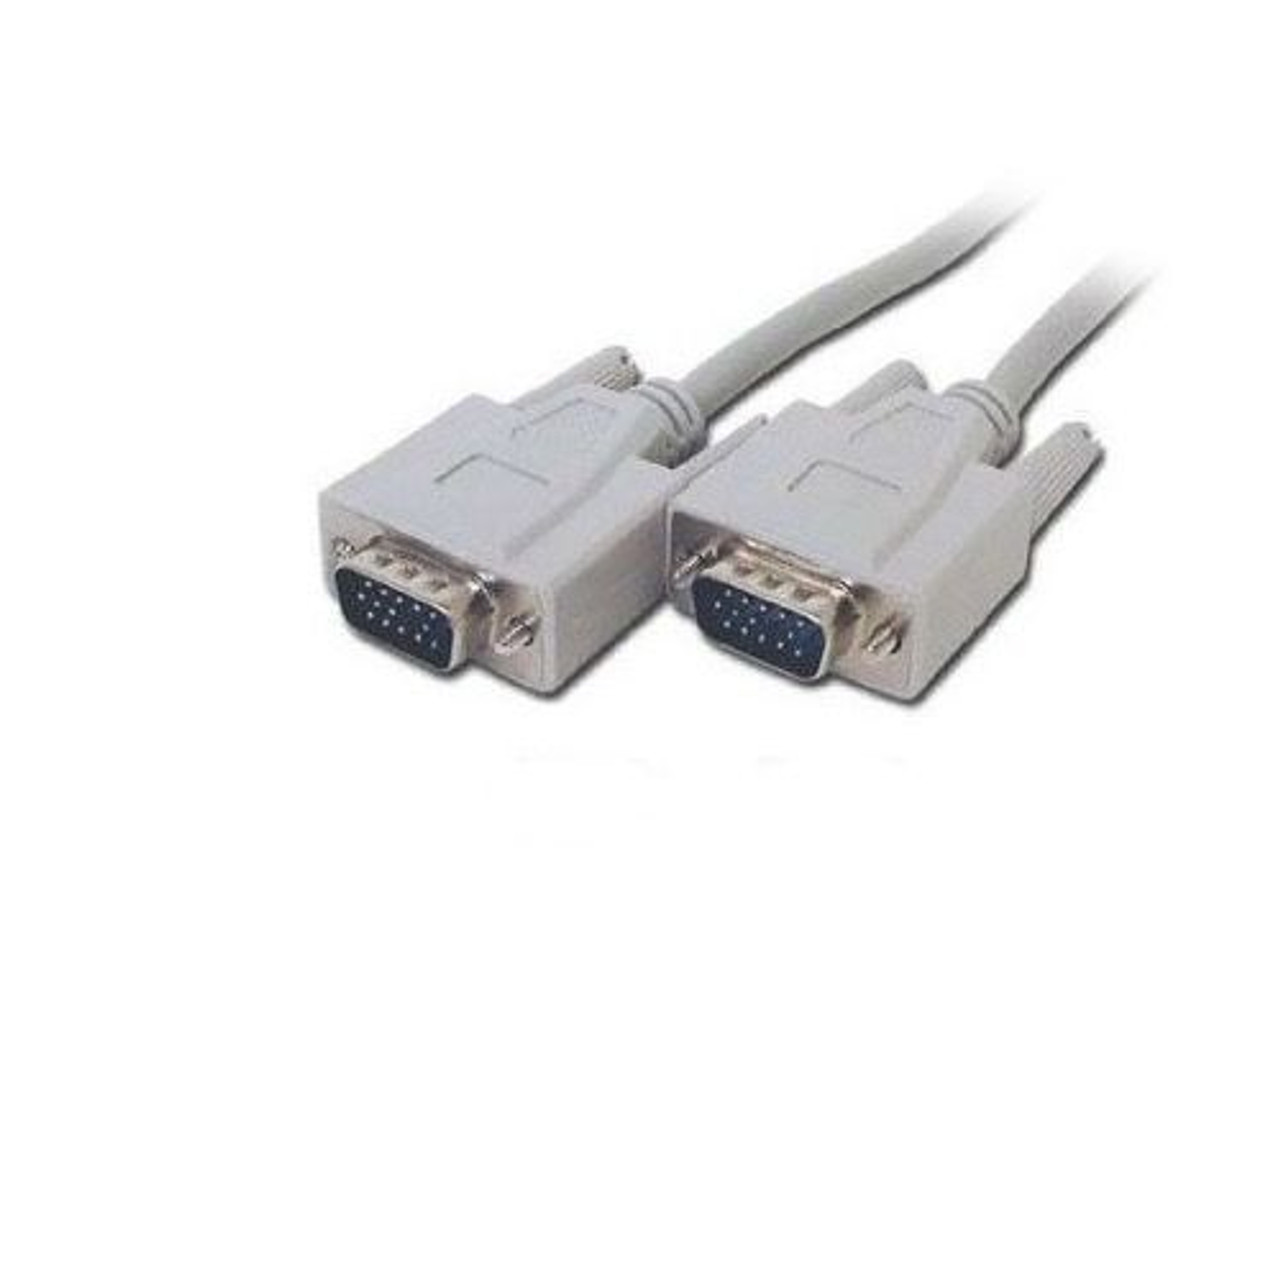 Steren 506-070 6' FT DE15HD Male to Male VGA Cable 1.8 Meter Ash Grey Cable Shielded PC Laptop to Projector Video Display Monitor Mouse Cable Interconnect Computer Cable, Part # 506070